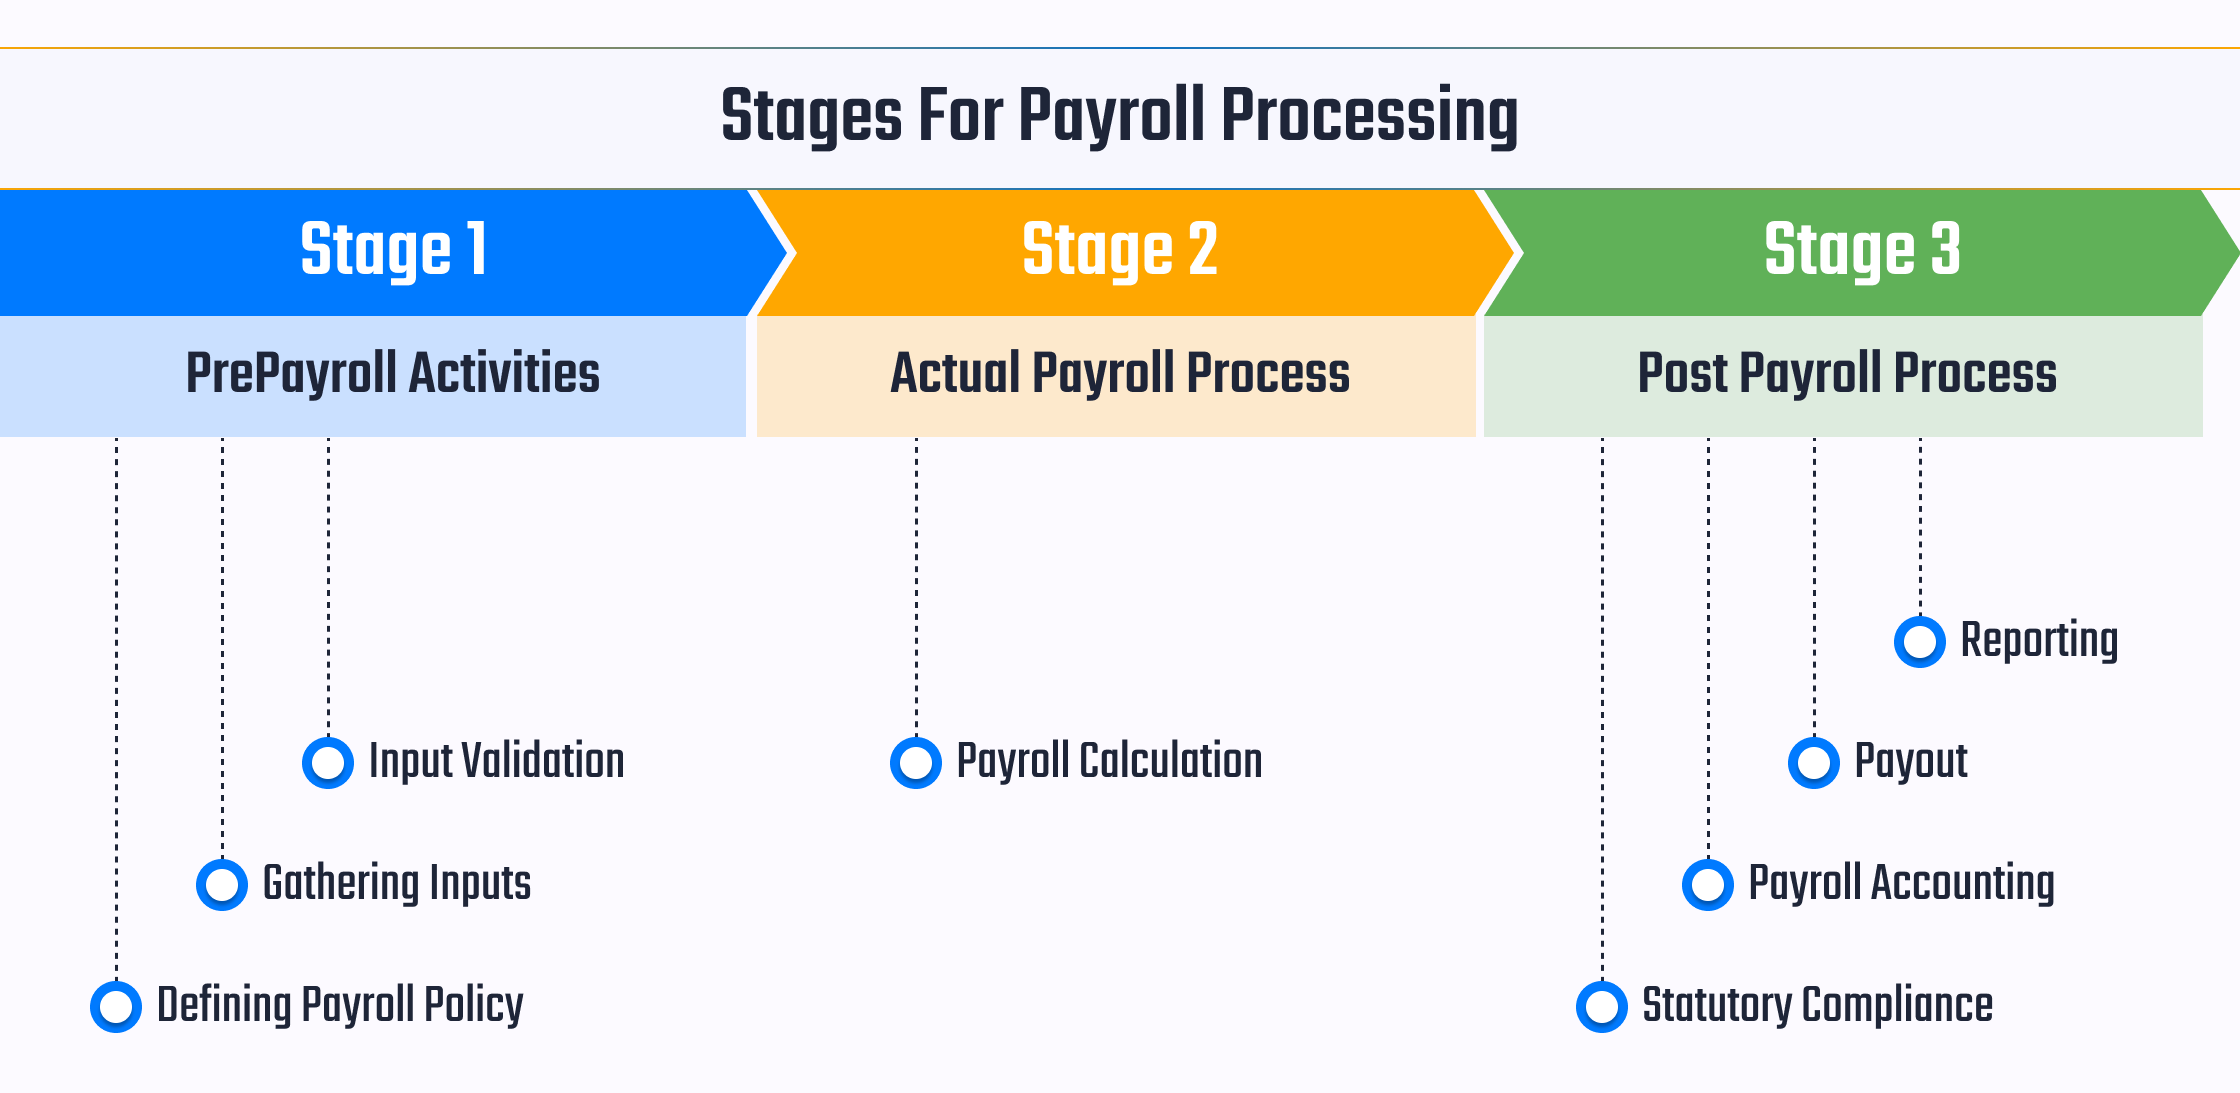 Stages for Payroll Processing